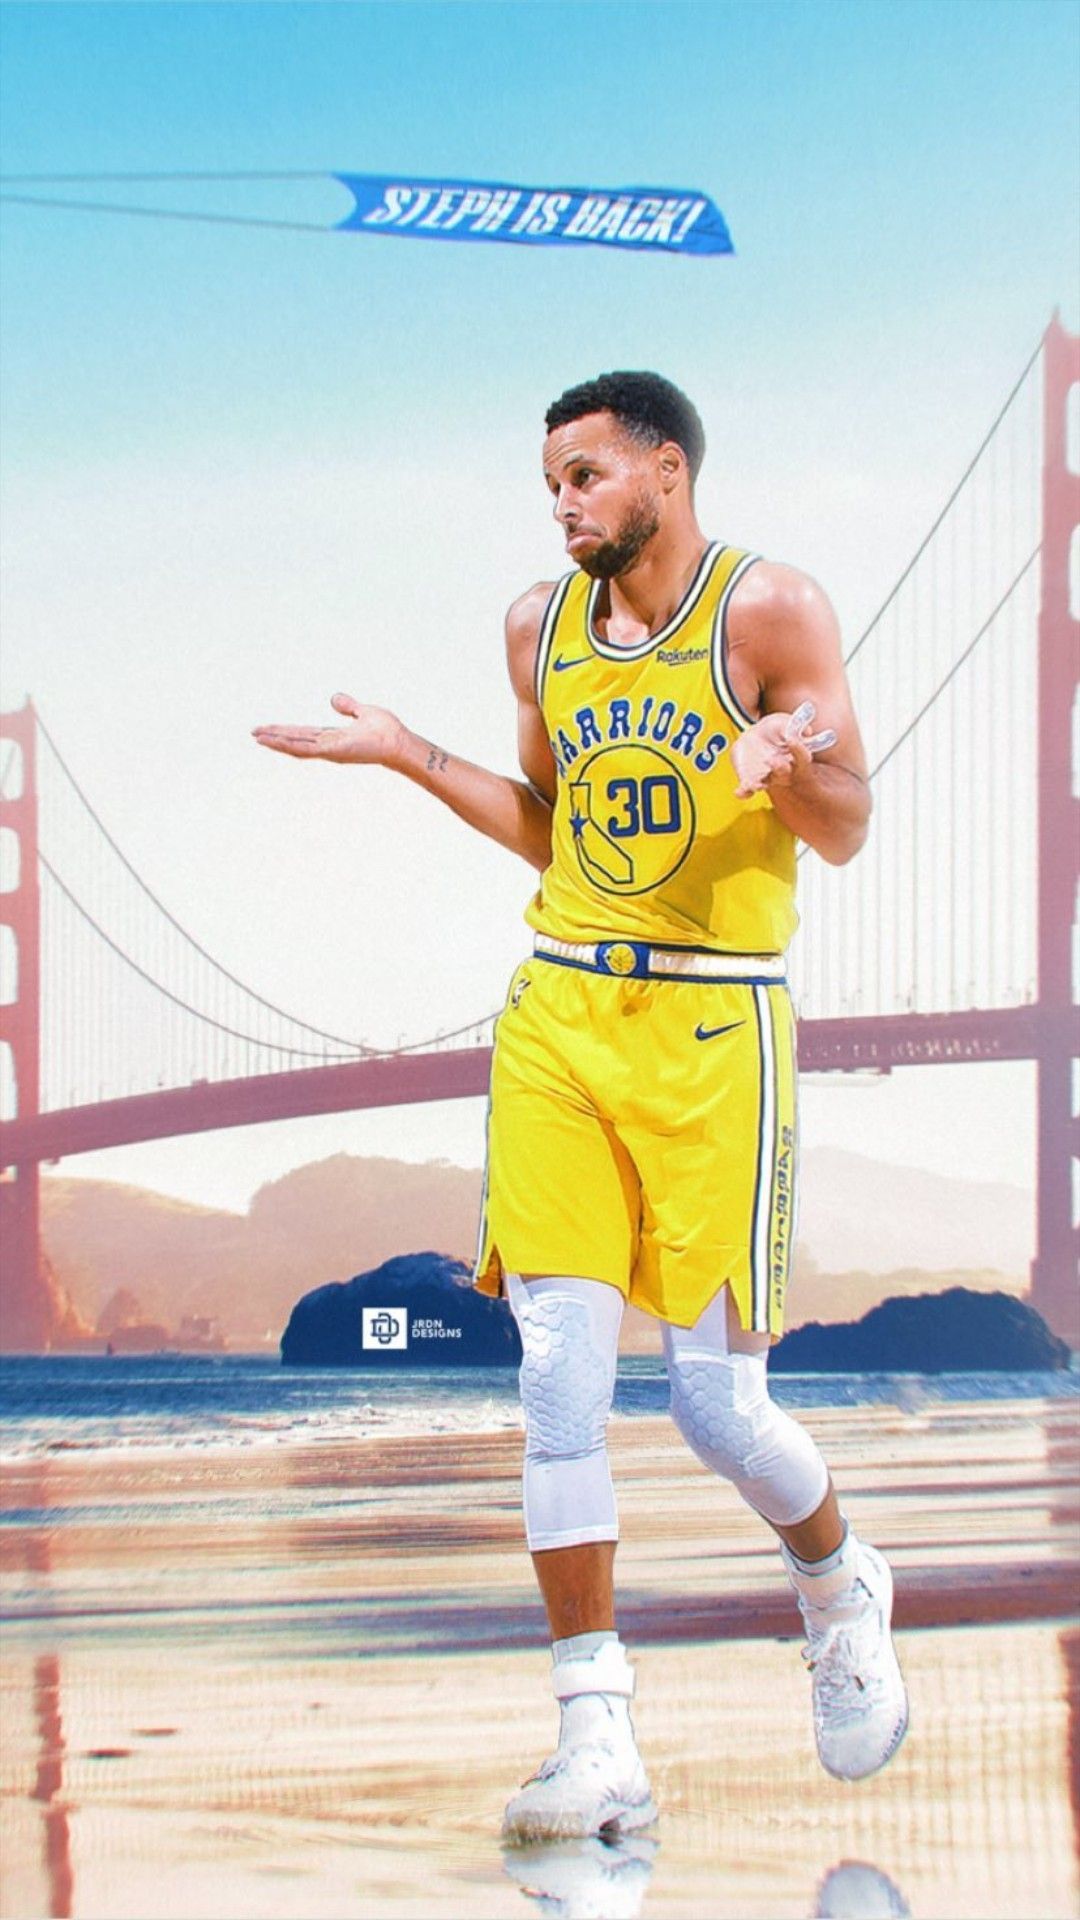 Stephen Curry wallpaper. Nba stephen curry, Stephen curry wallpaper, Stephen curry